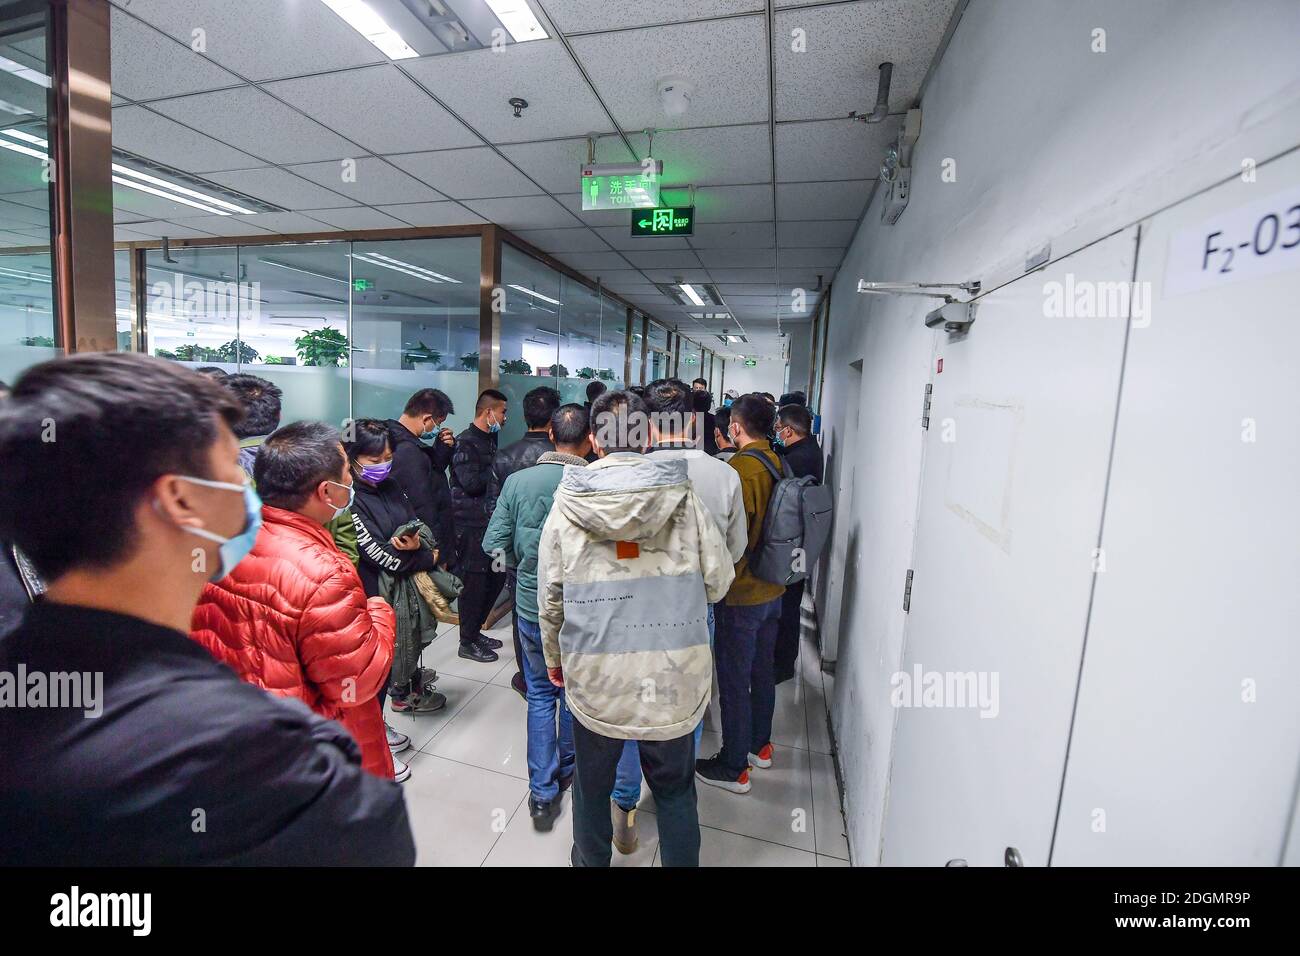 People gather at the headquarter of Danke Apartment in Beijing fighting for their legal rights in Beijing, China, 10 November 2020. Stock Photo